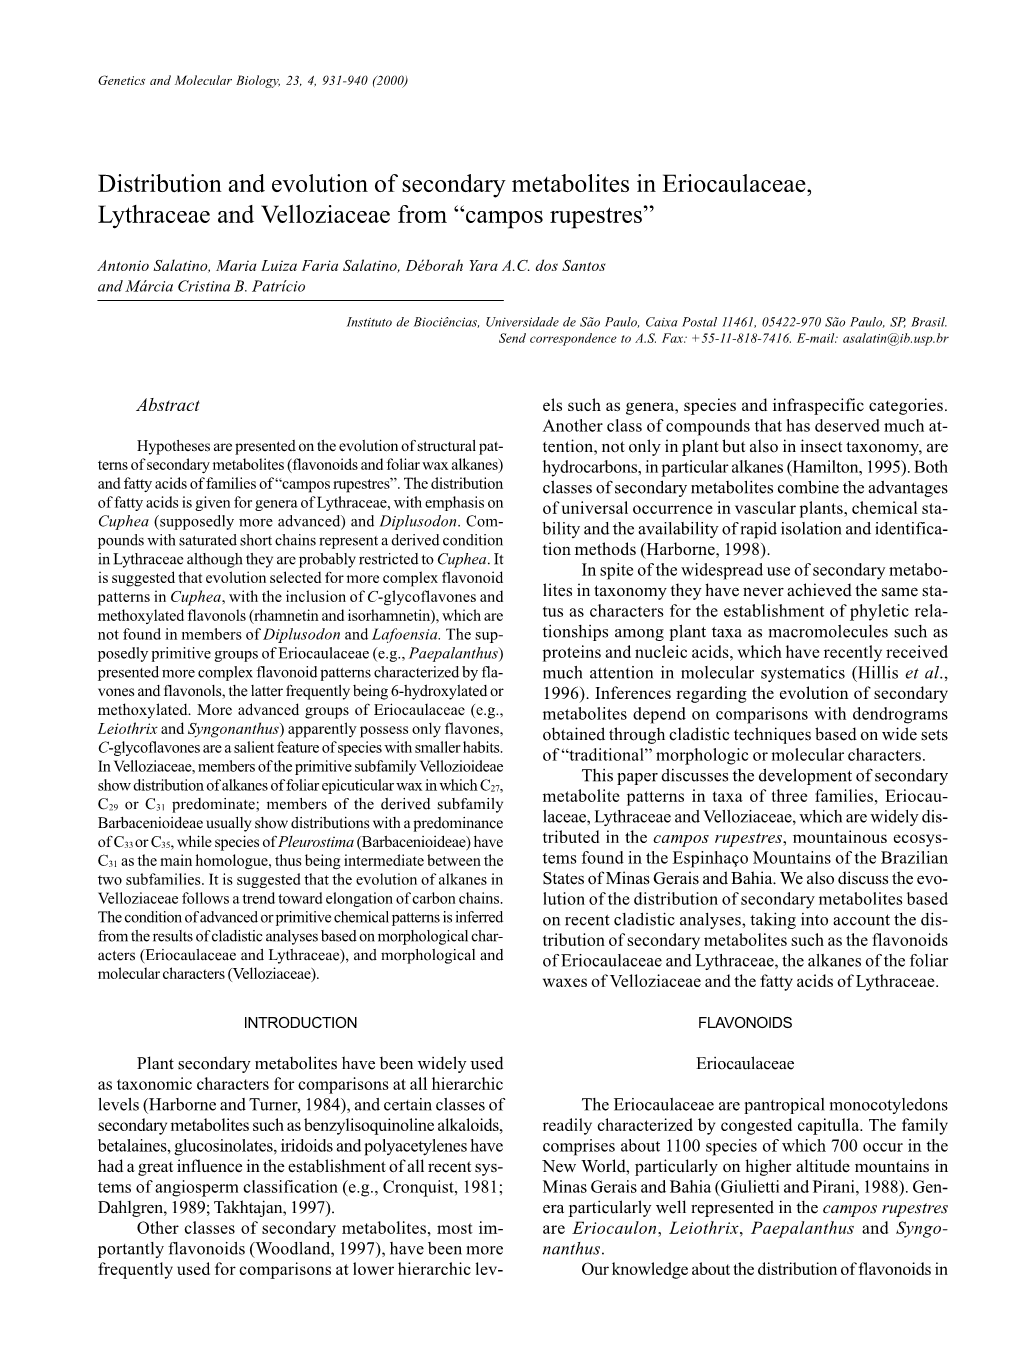 Distribution and Evolution of Secondary Metabolites in Eriocaulaceae, Lythraceae and Velloziaceae from “Campos Rupestres”